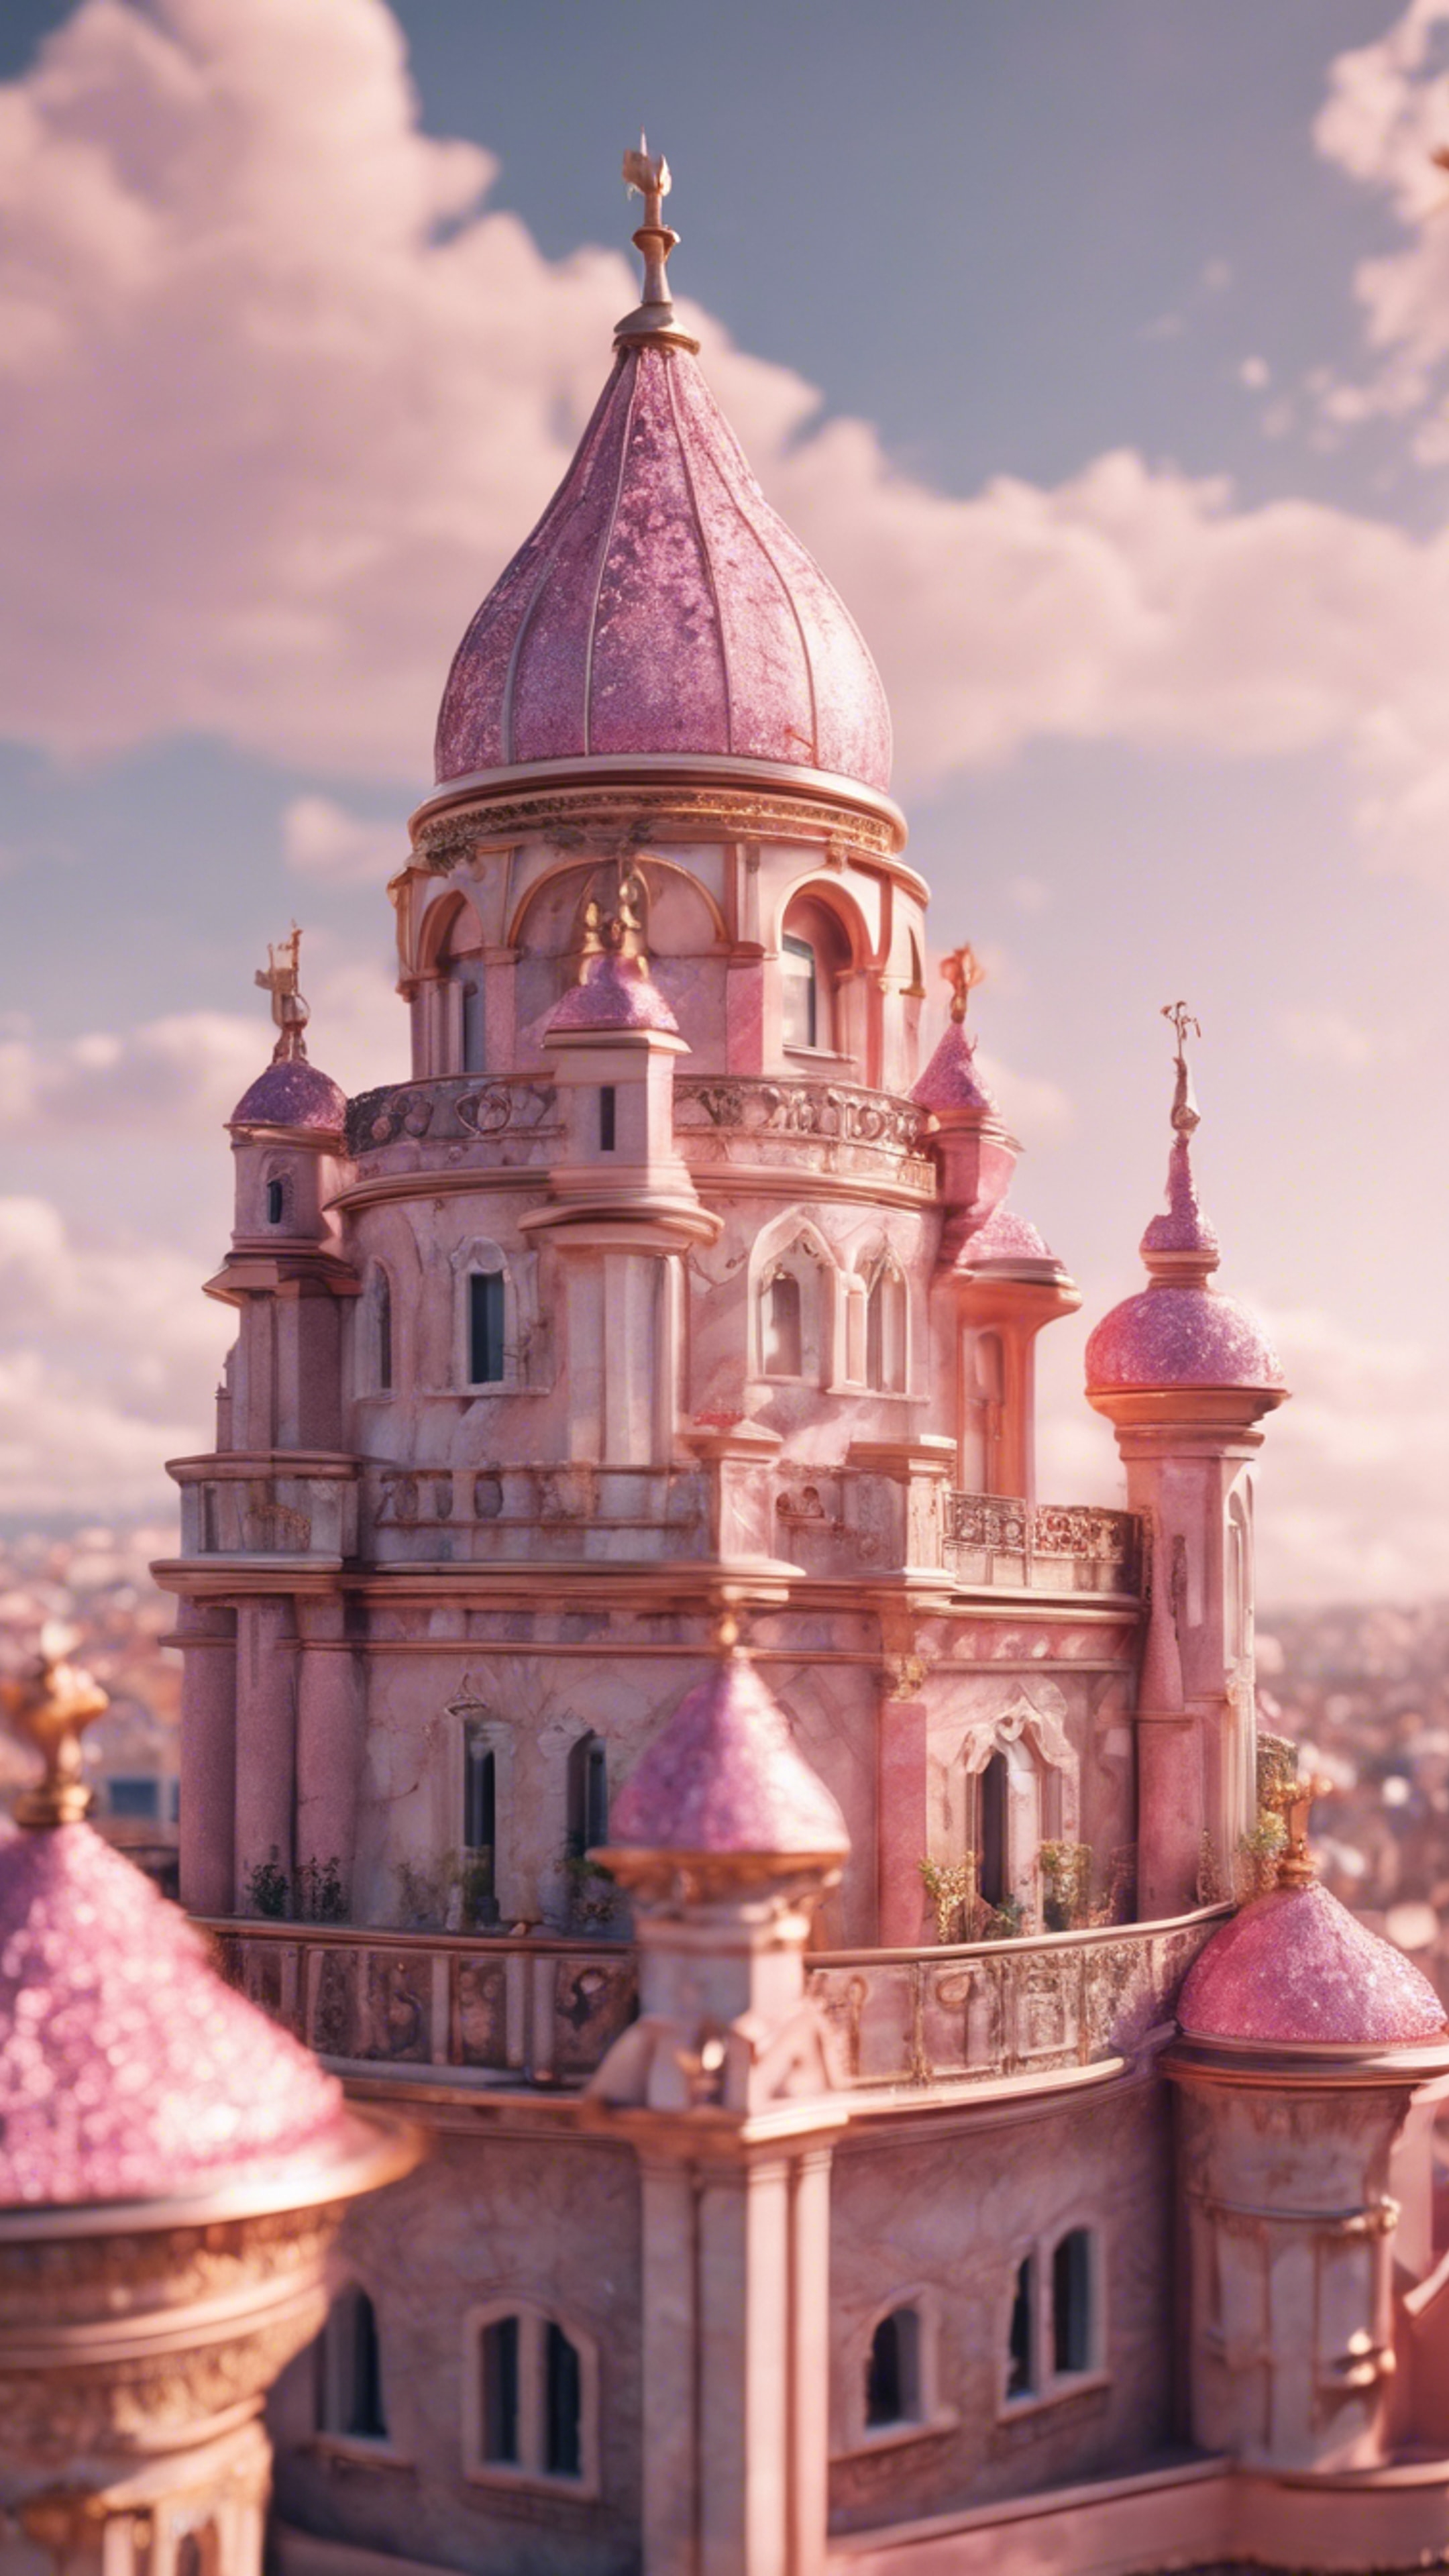 An ornate pink marble castle with glimmering golden rooftops during a sunny afternoon. Tapet[39cdf807c12f4b9c8dd2]